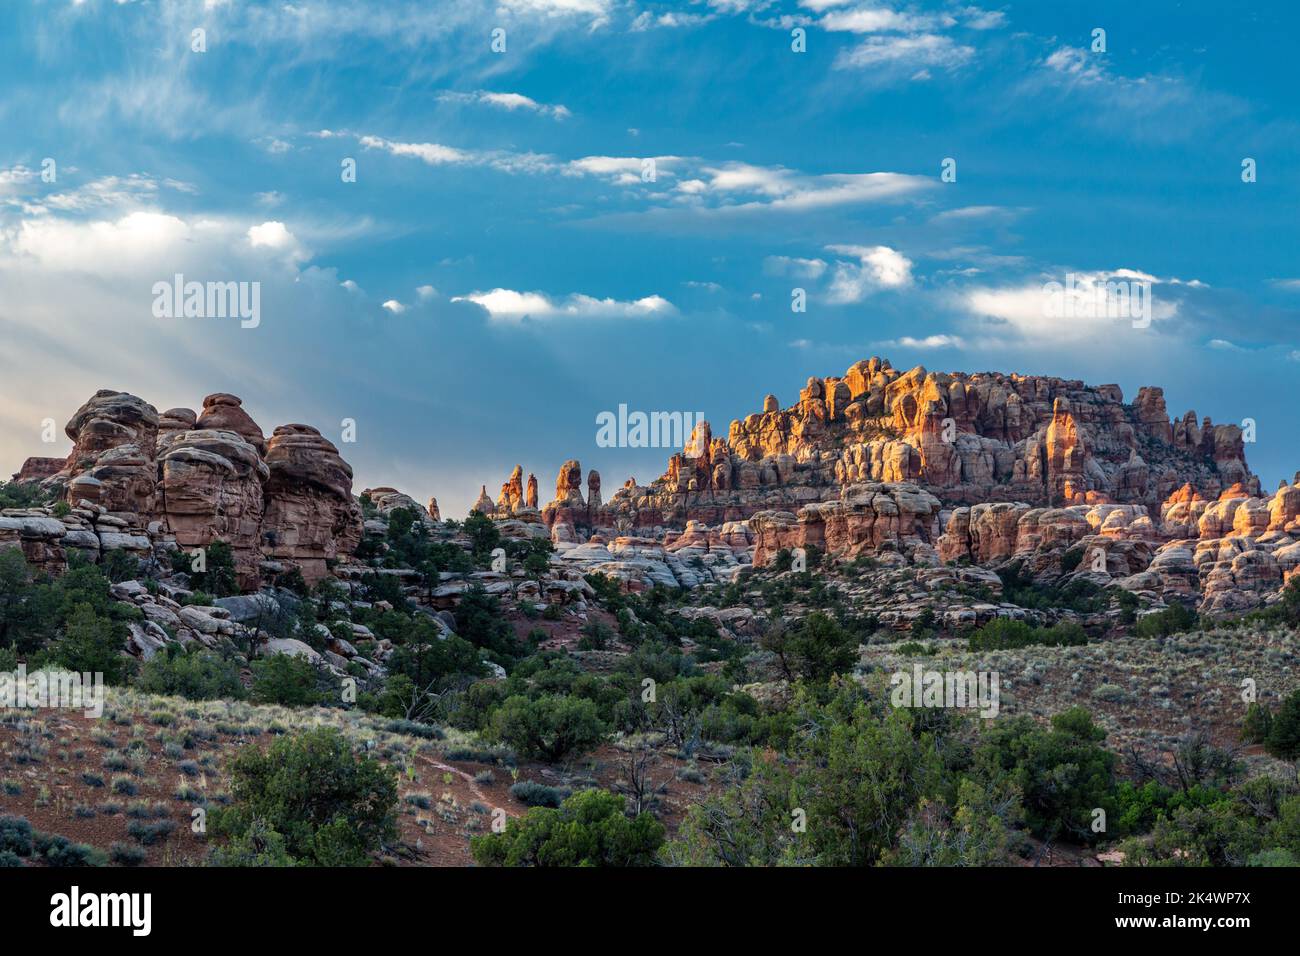 The Needles, Cedar Mesa sandstone spires, at sunrise in the Needles District of Canyonlands National Park, Utah. Stock Photo